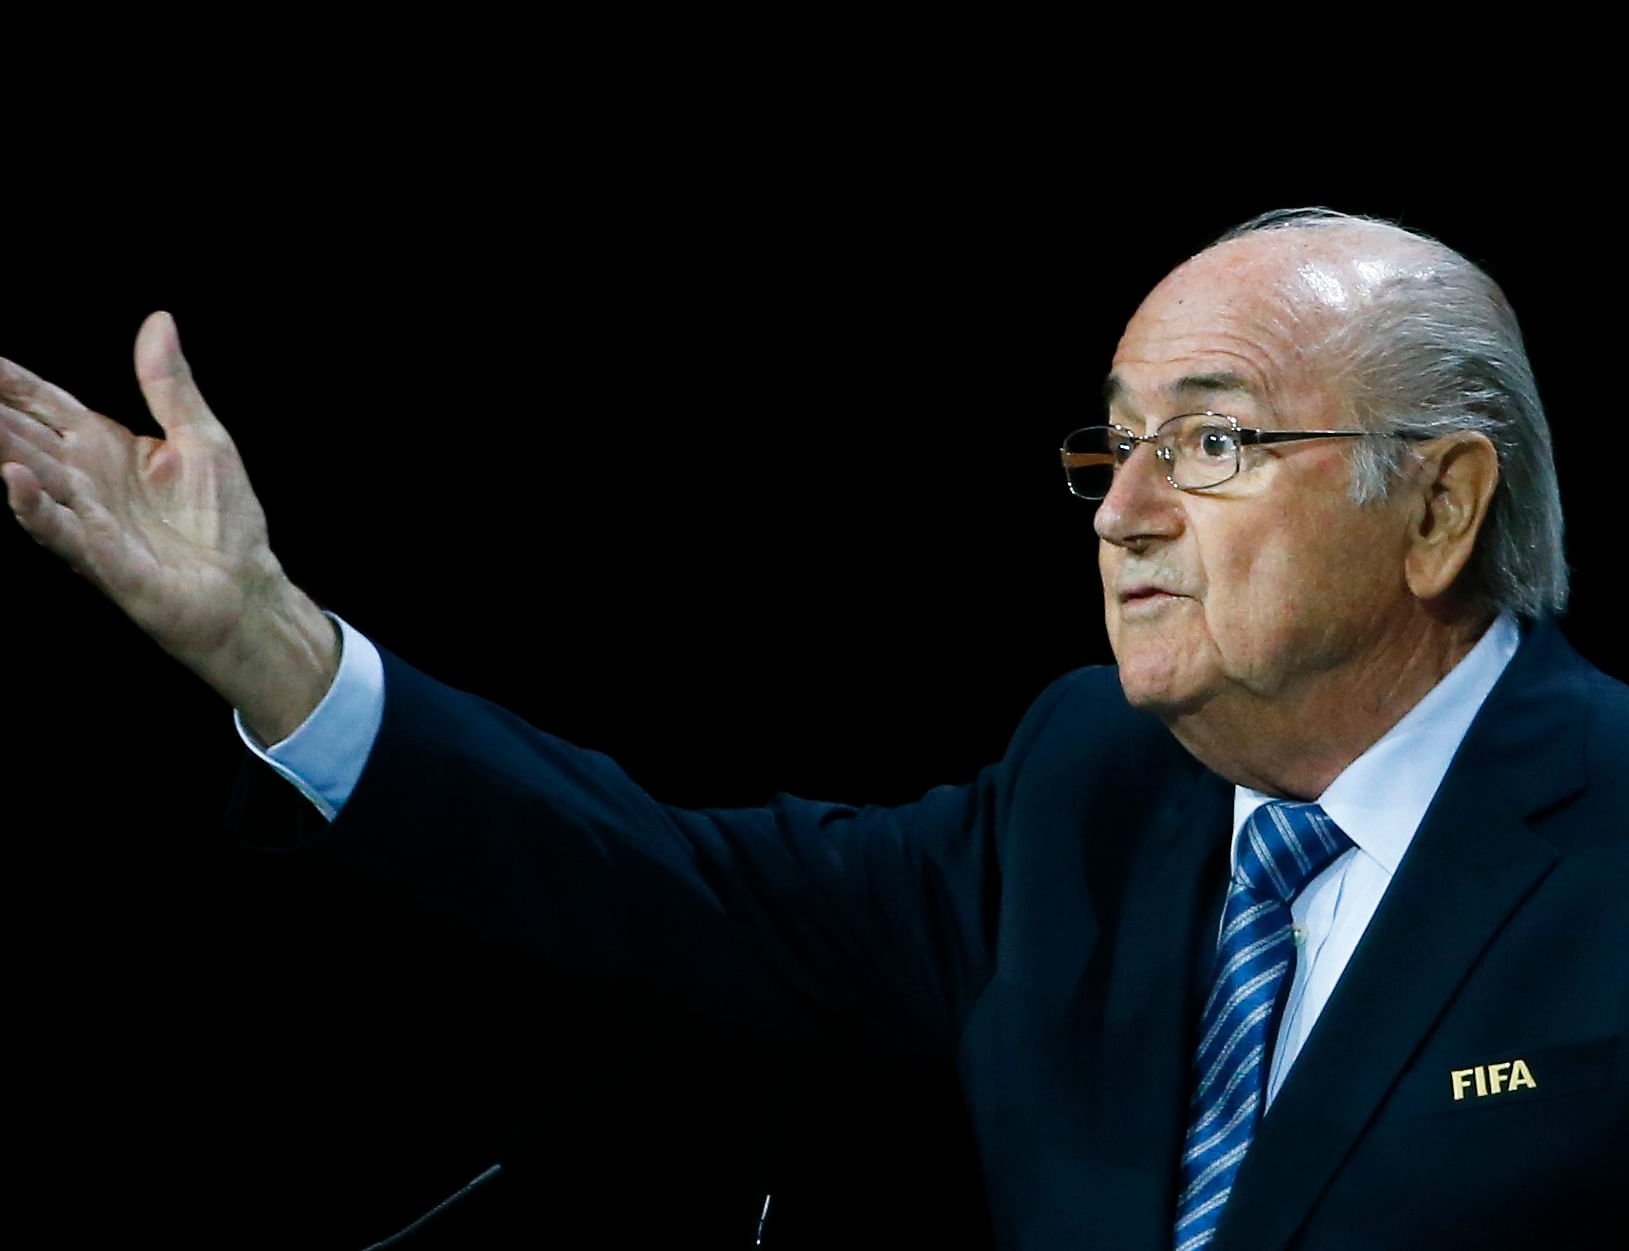 FIFA President Sepp Blatter delivers an opening speech at the 65th FIFA Congress in Zurich, Switzerland, May 29, 2015. The embattled head of world soccer, FIFA President Sepp Blatter, is expected to be re-elected on Friday despite growing calls for his resignation amid a corruption scandal that has engulfed the sport's governing body. REUTERS